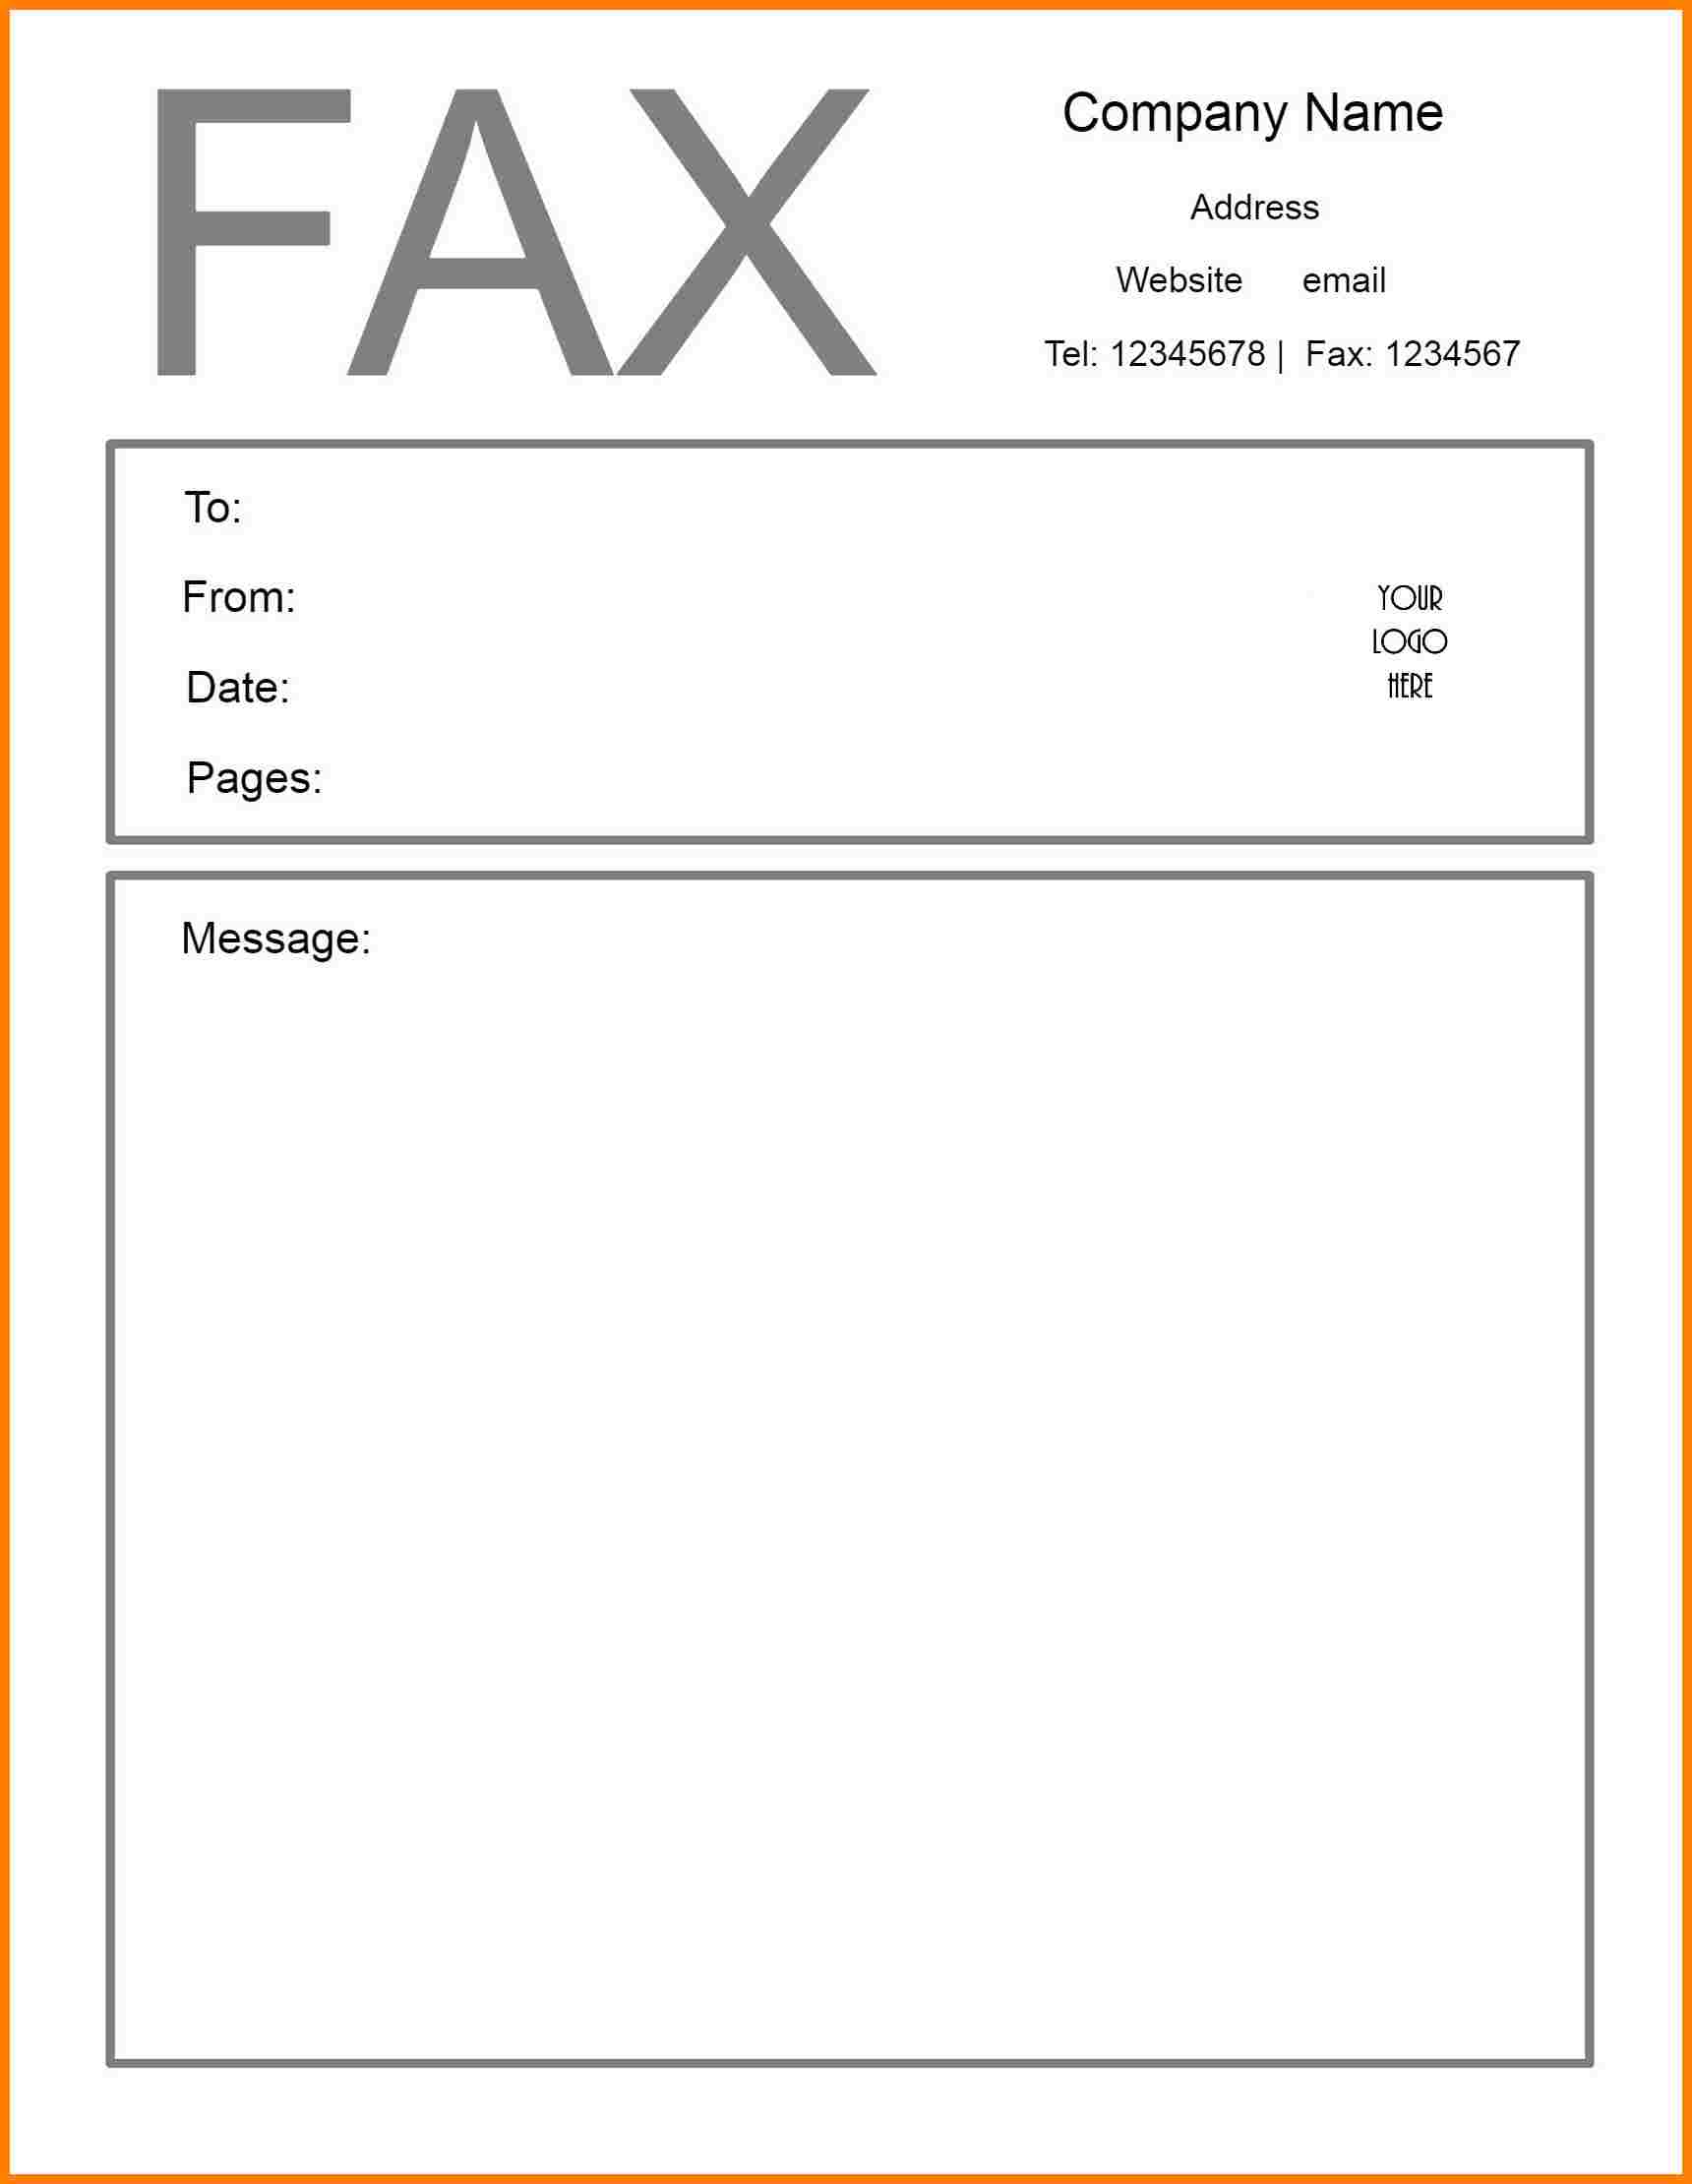 free-fax-cover-sheet-example-infographic-template